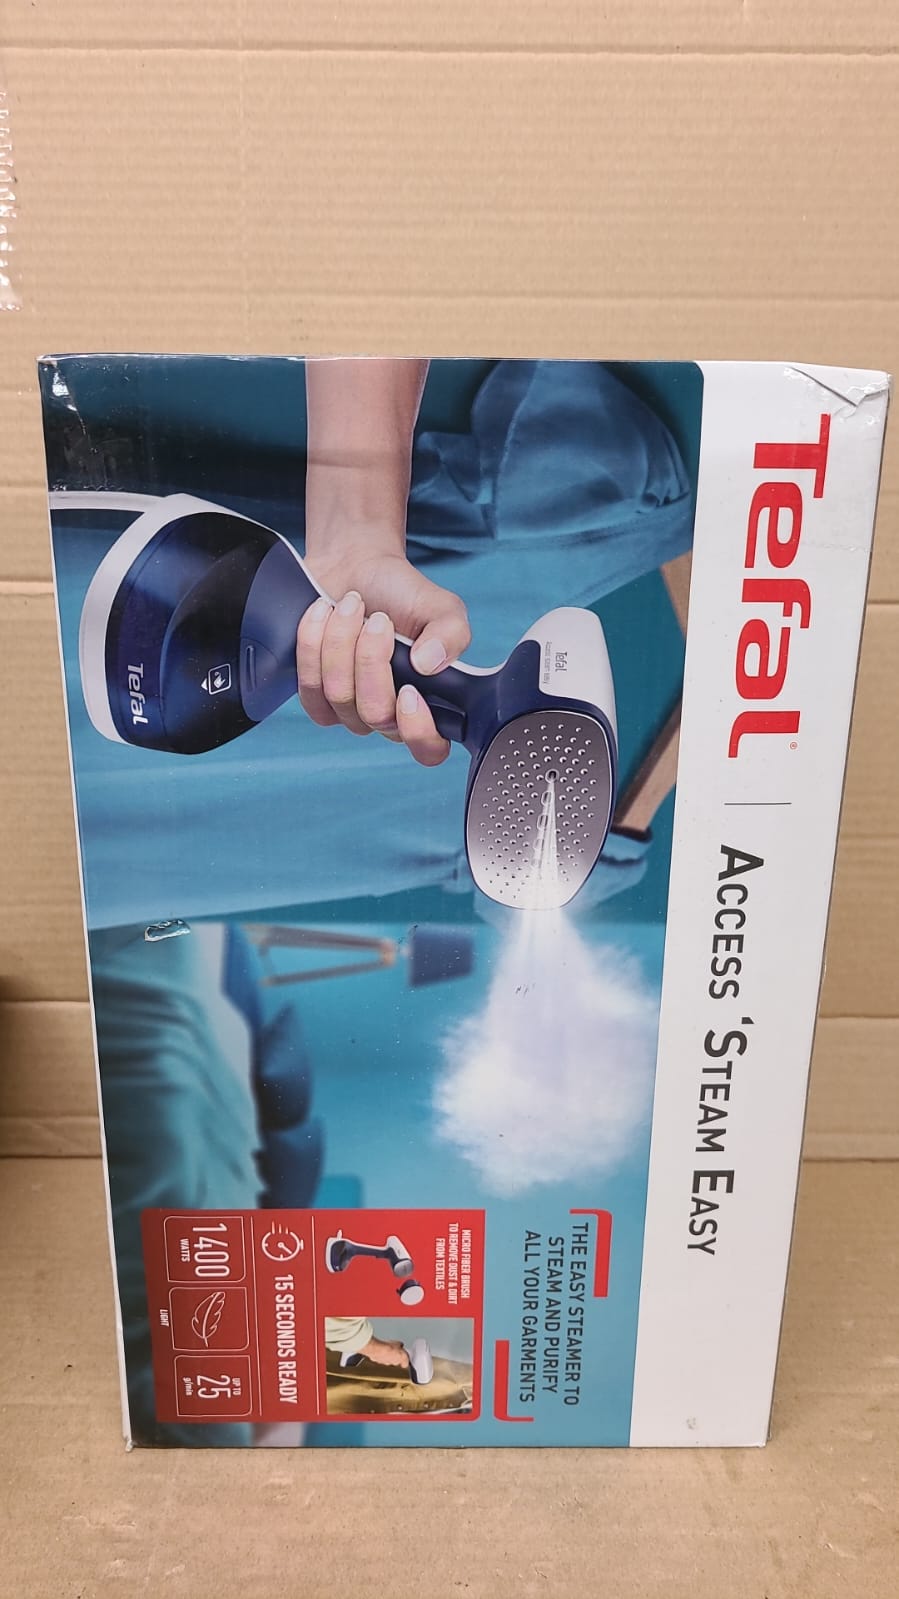 Tefal Access Steam Easy Handheld Clothes Steamer-1208